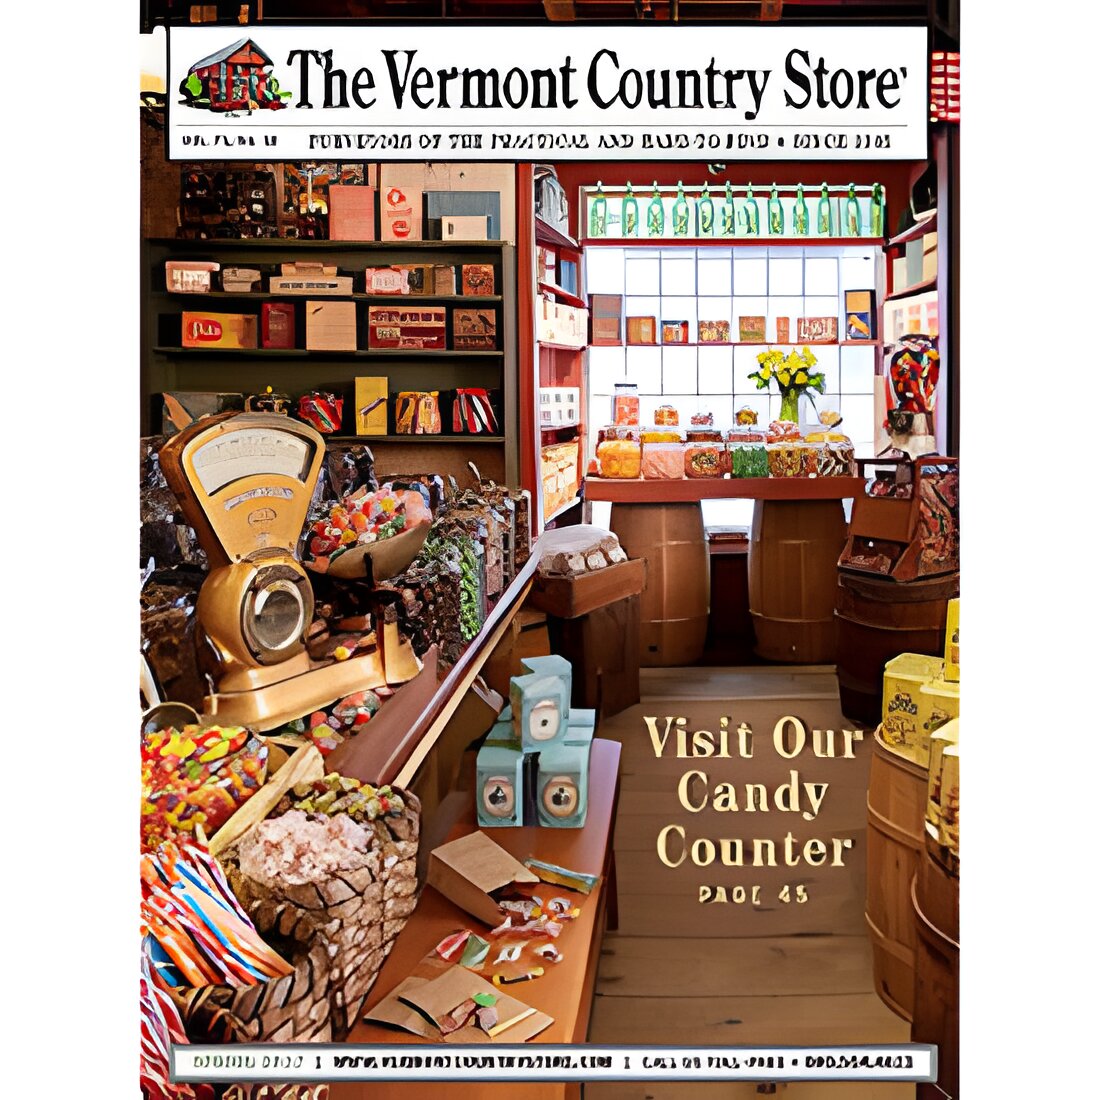 Free The Vermont Country Store Catalog